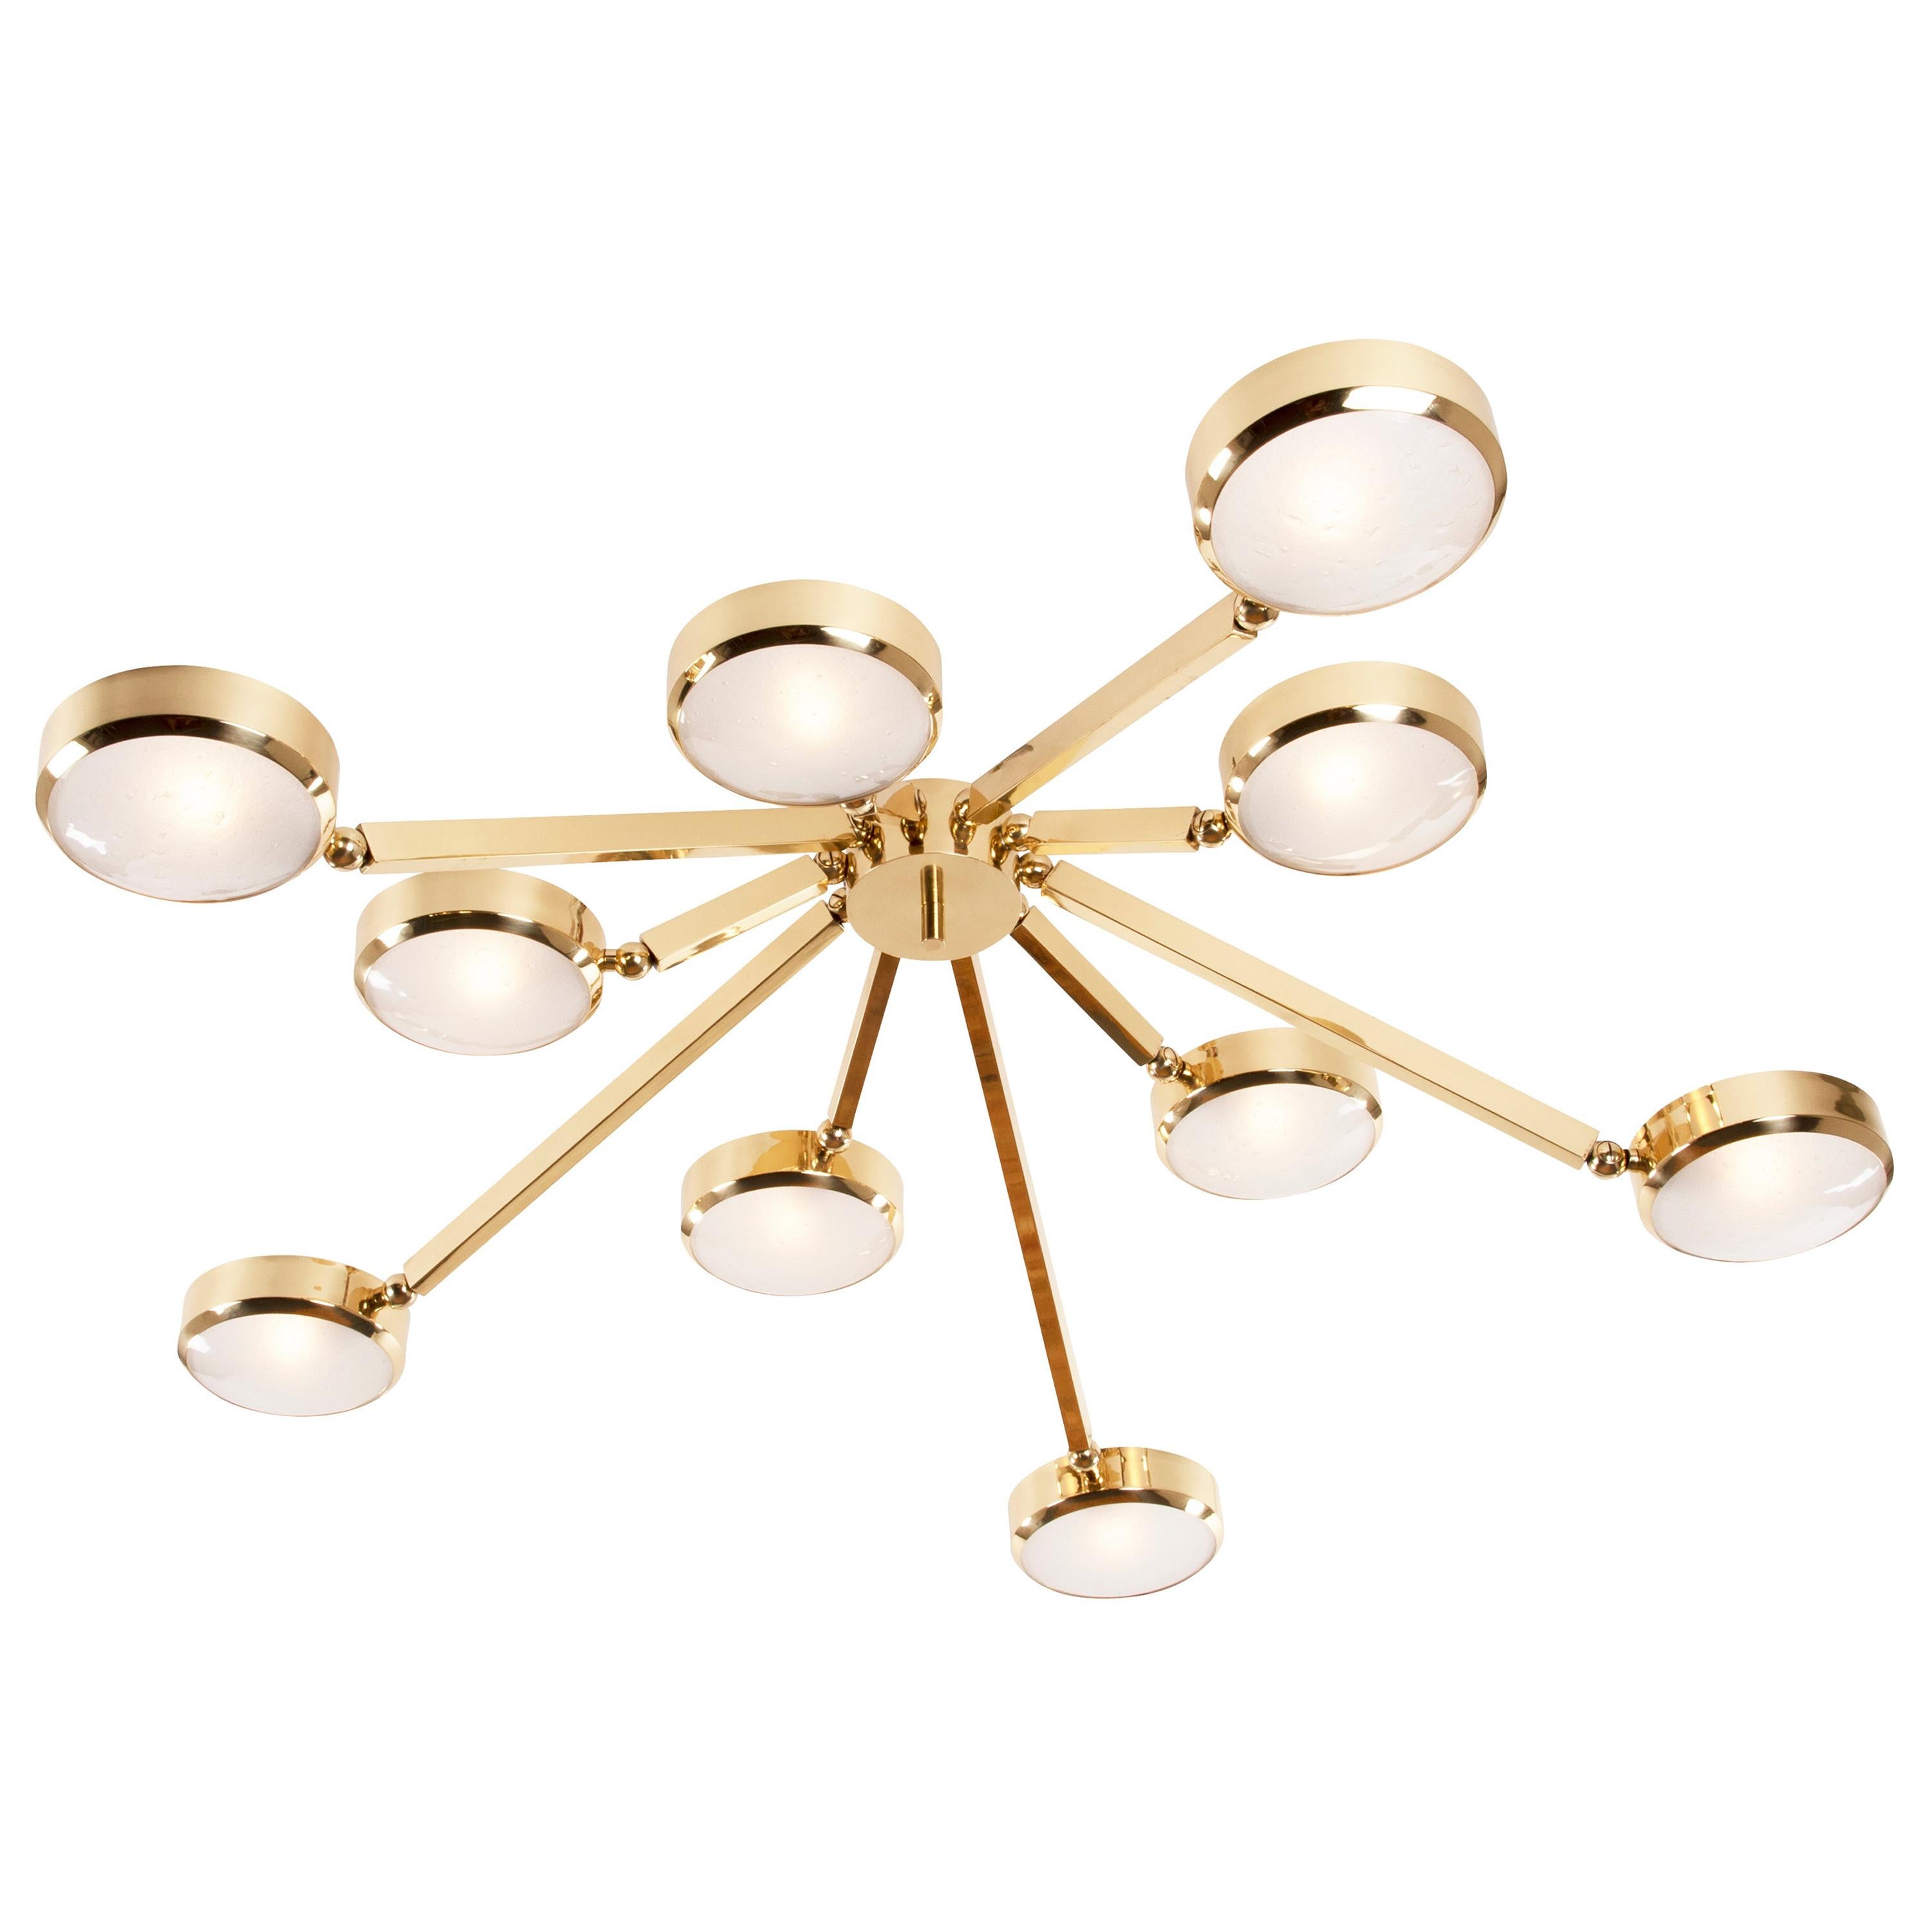 Oculus Ceiling Light by Gaspare Asaro-Murano Glass and Polished Nickel Finish In New Condition For Sale In New York, NY